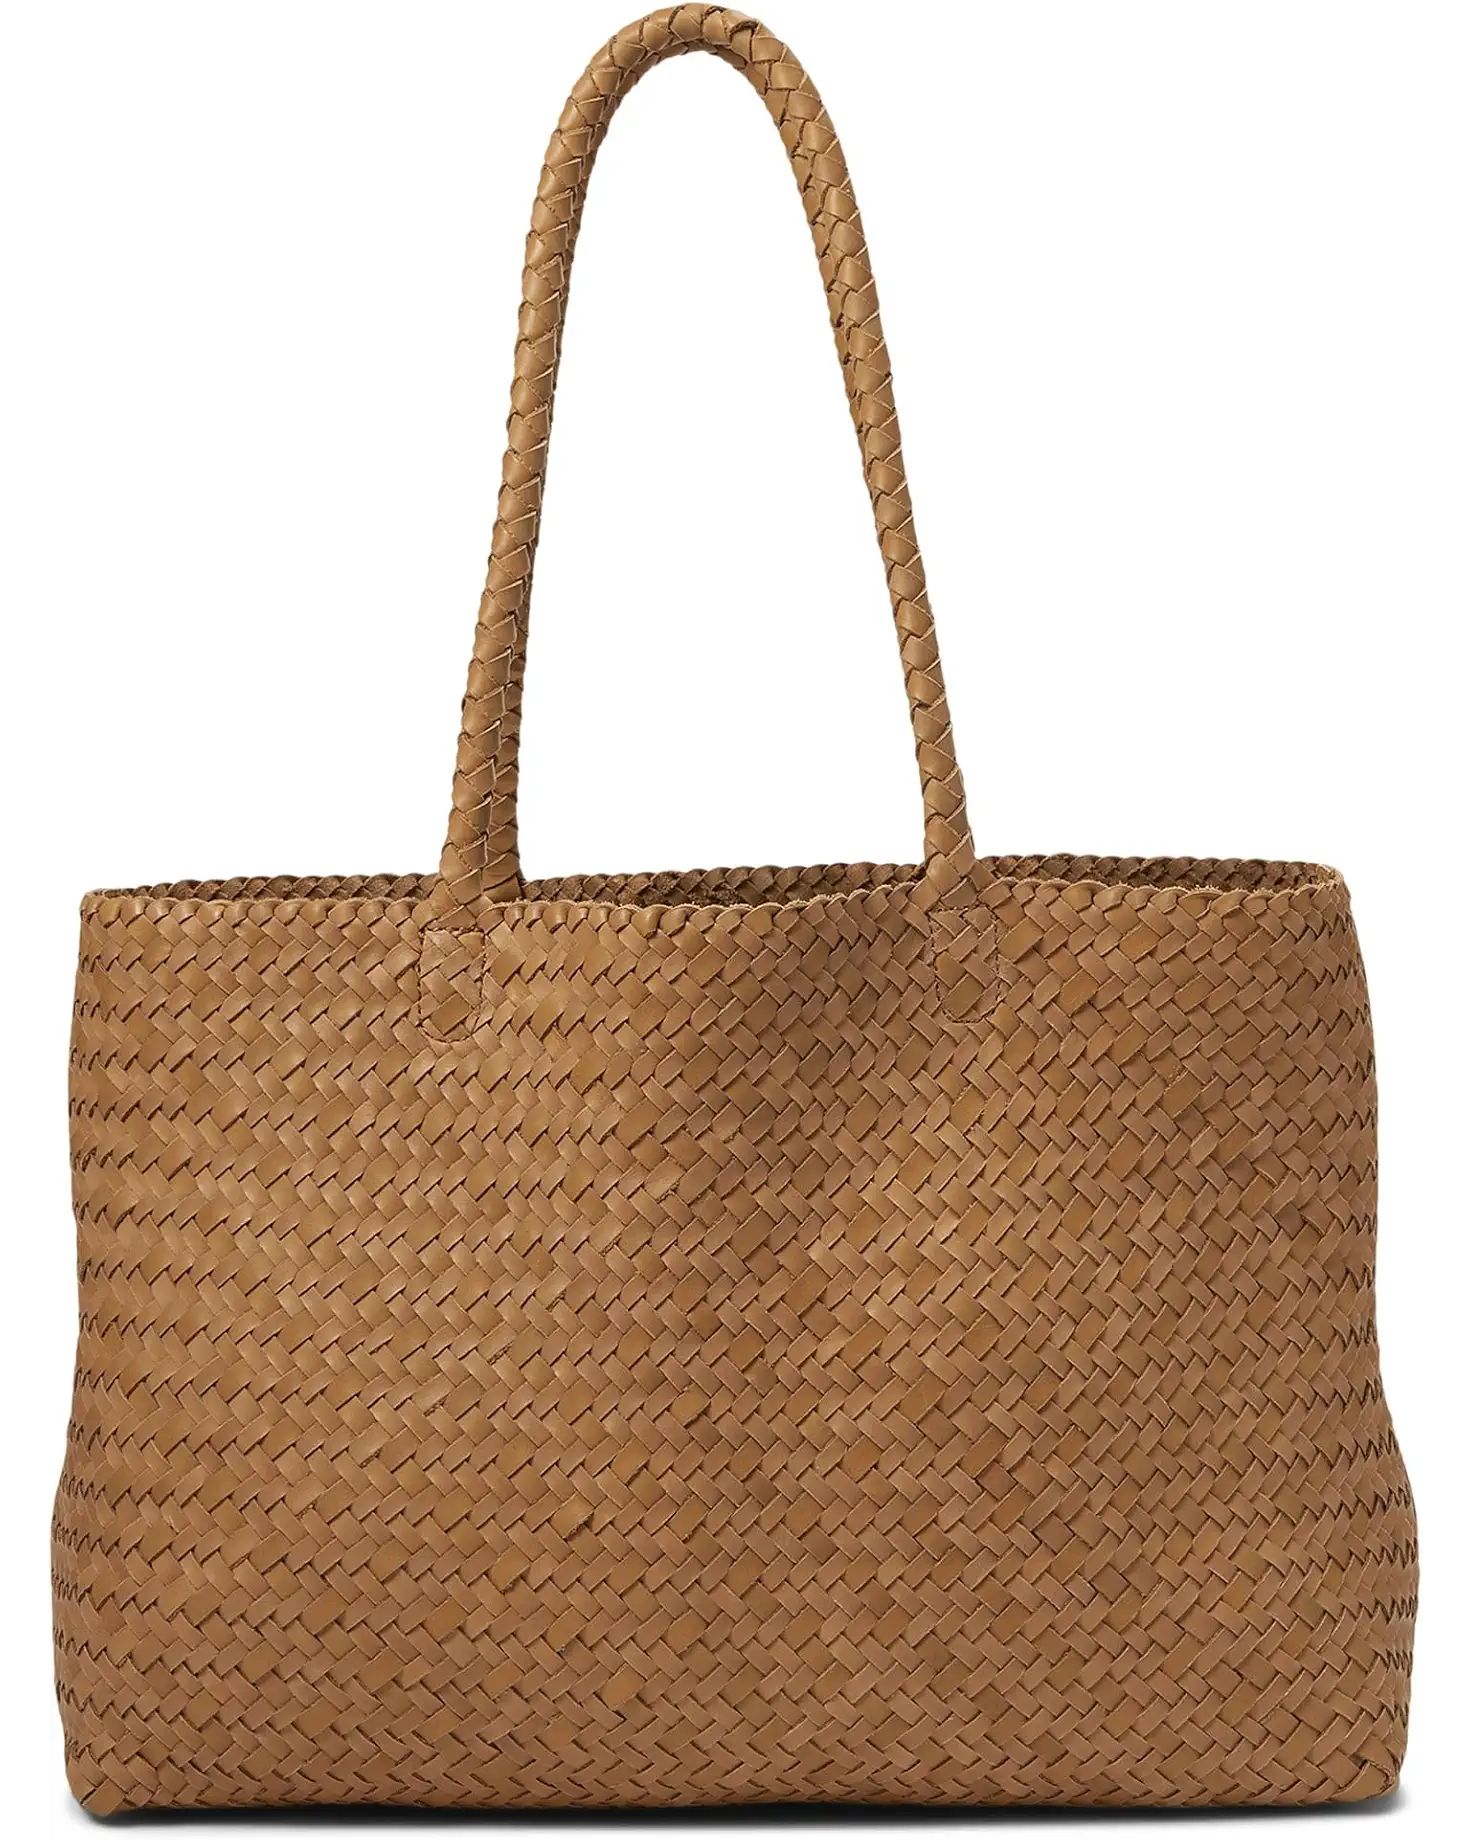 Madewell Madewell Transport E/W Woven Tote | Zappos